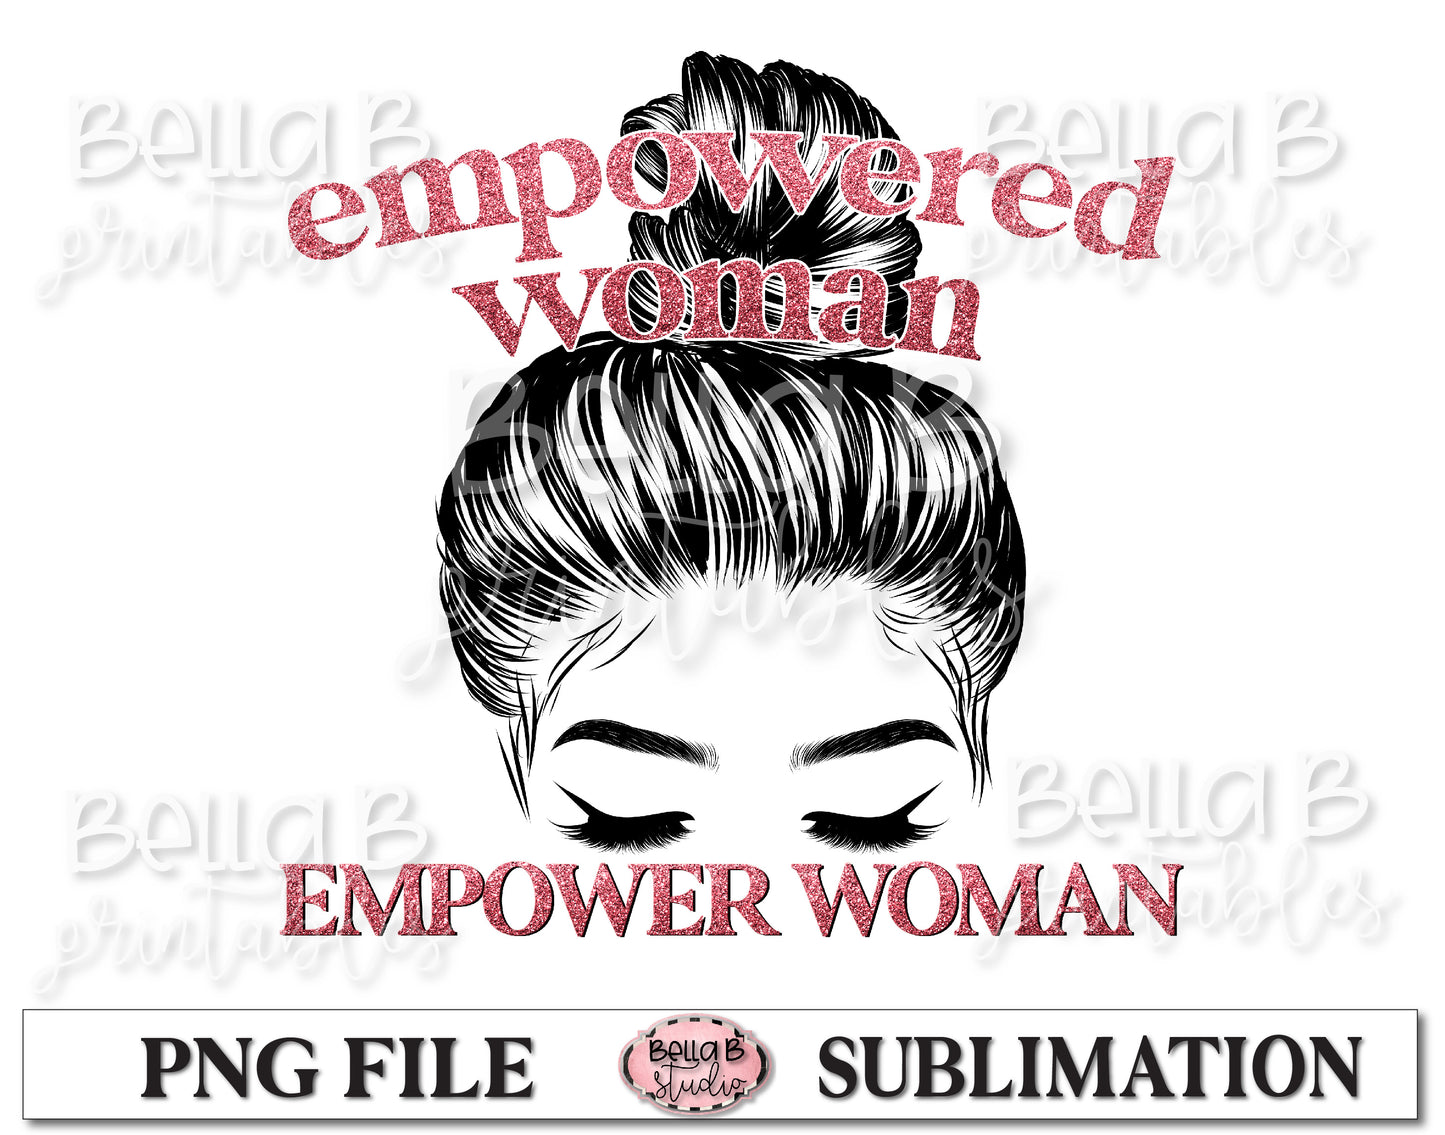 Empowered Woman Empower Woman Sublimation Design